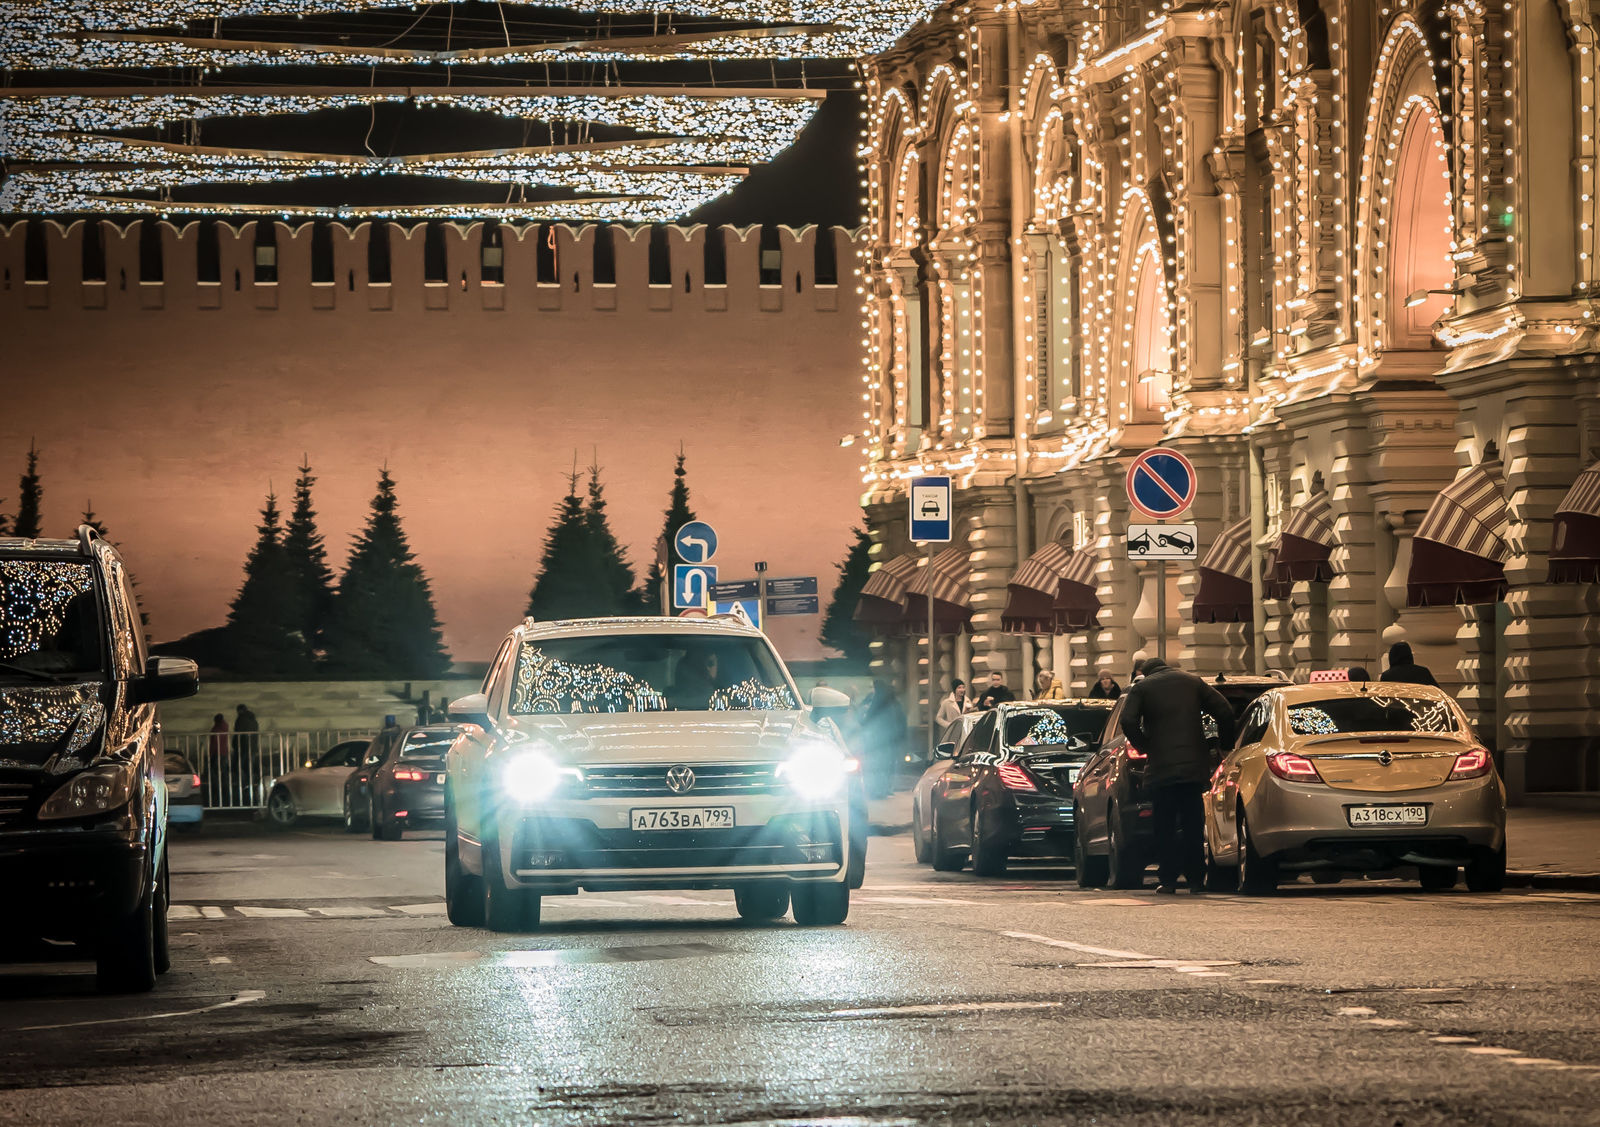 Story: A Moscow night with flashing lights